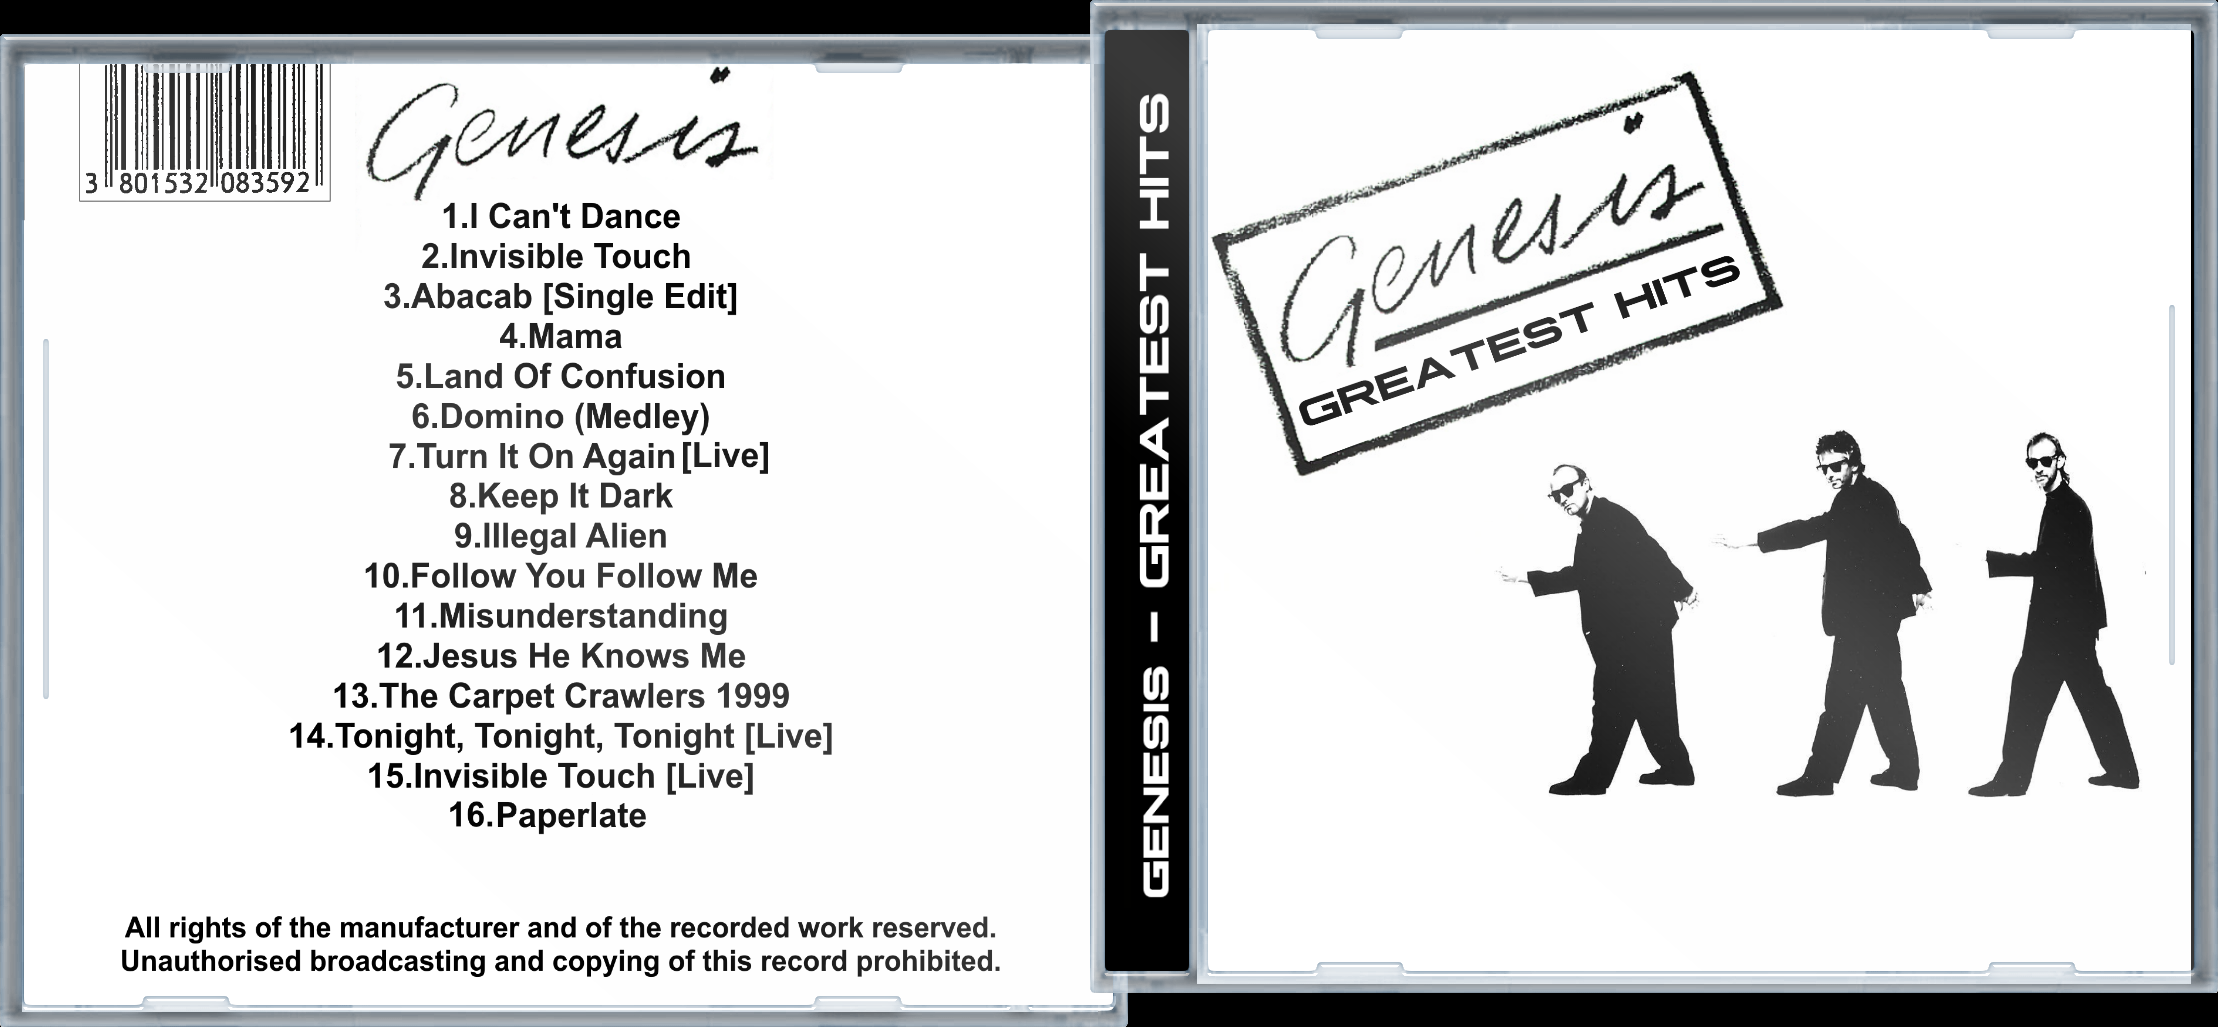 Genesis - Greatest Hits box cover